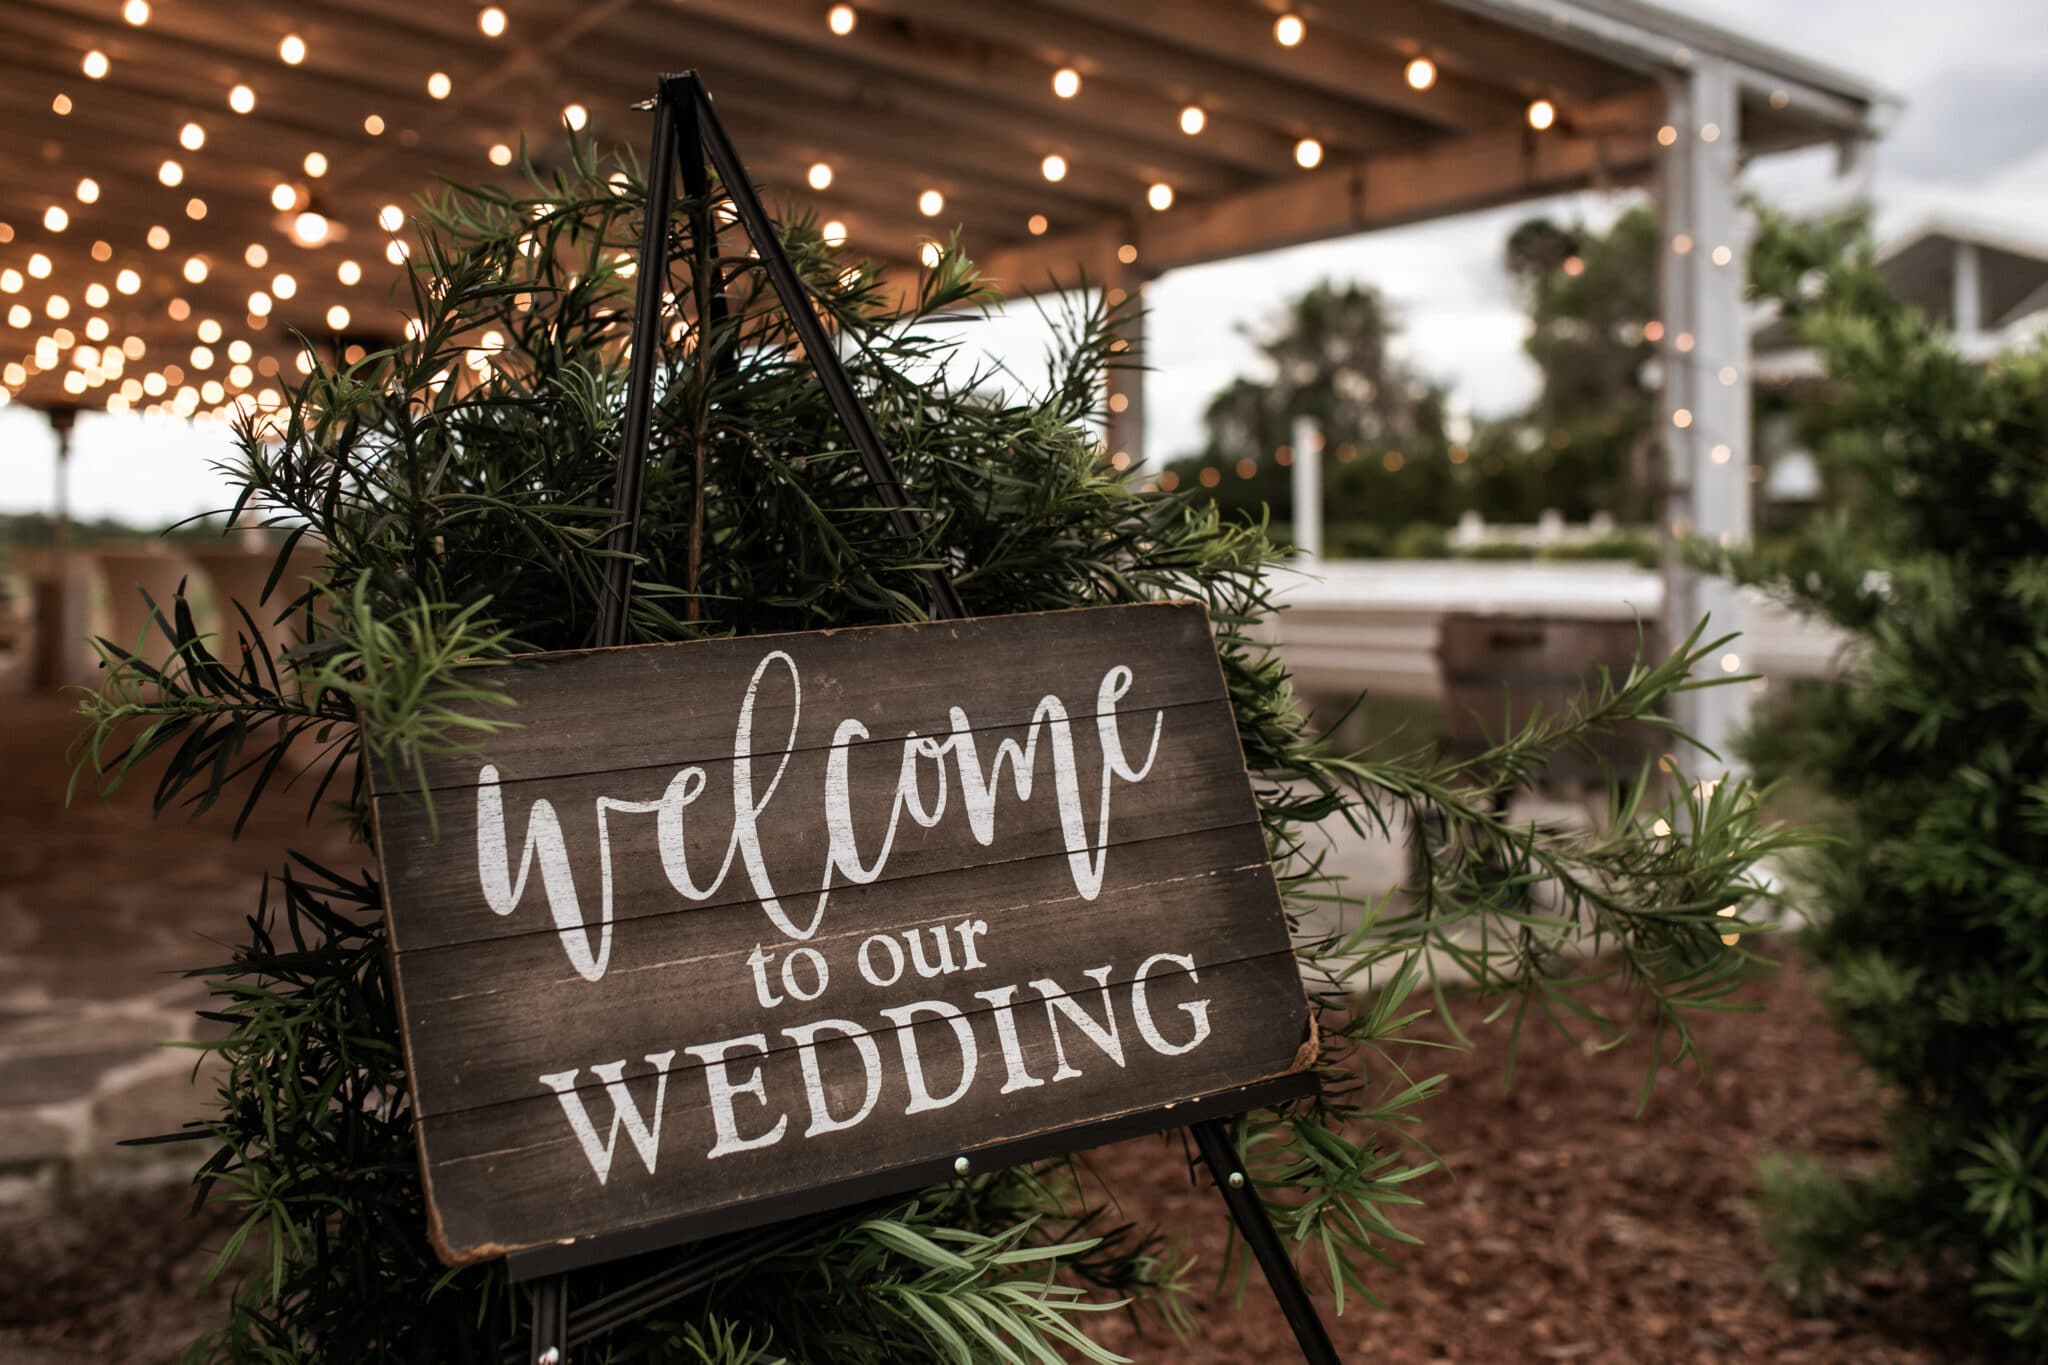 the welcome sign for the barn wedding with greenery and rustic feeling.